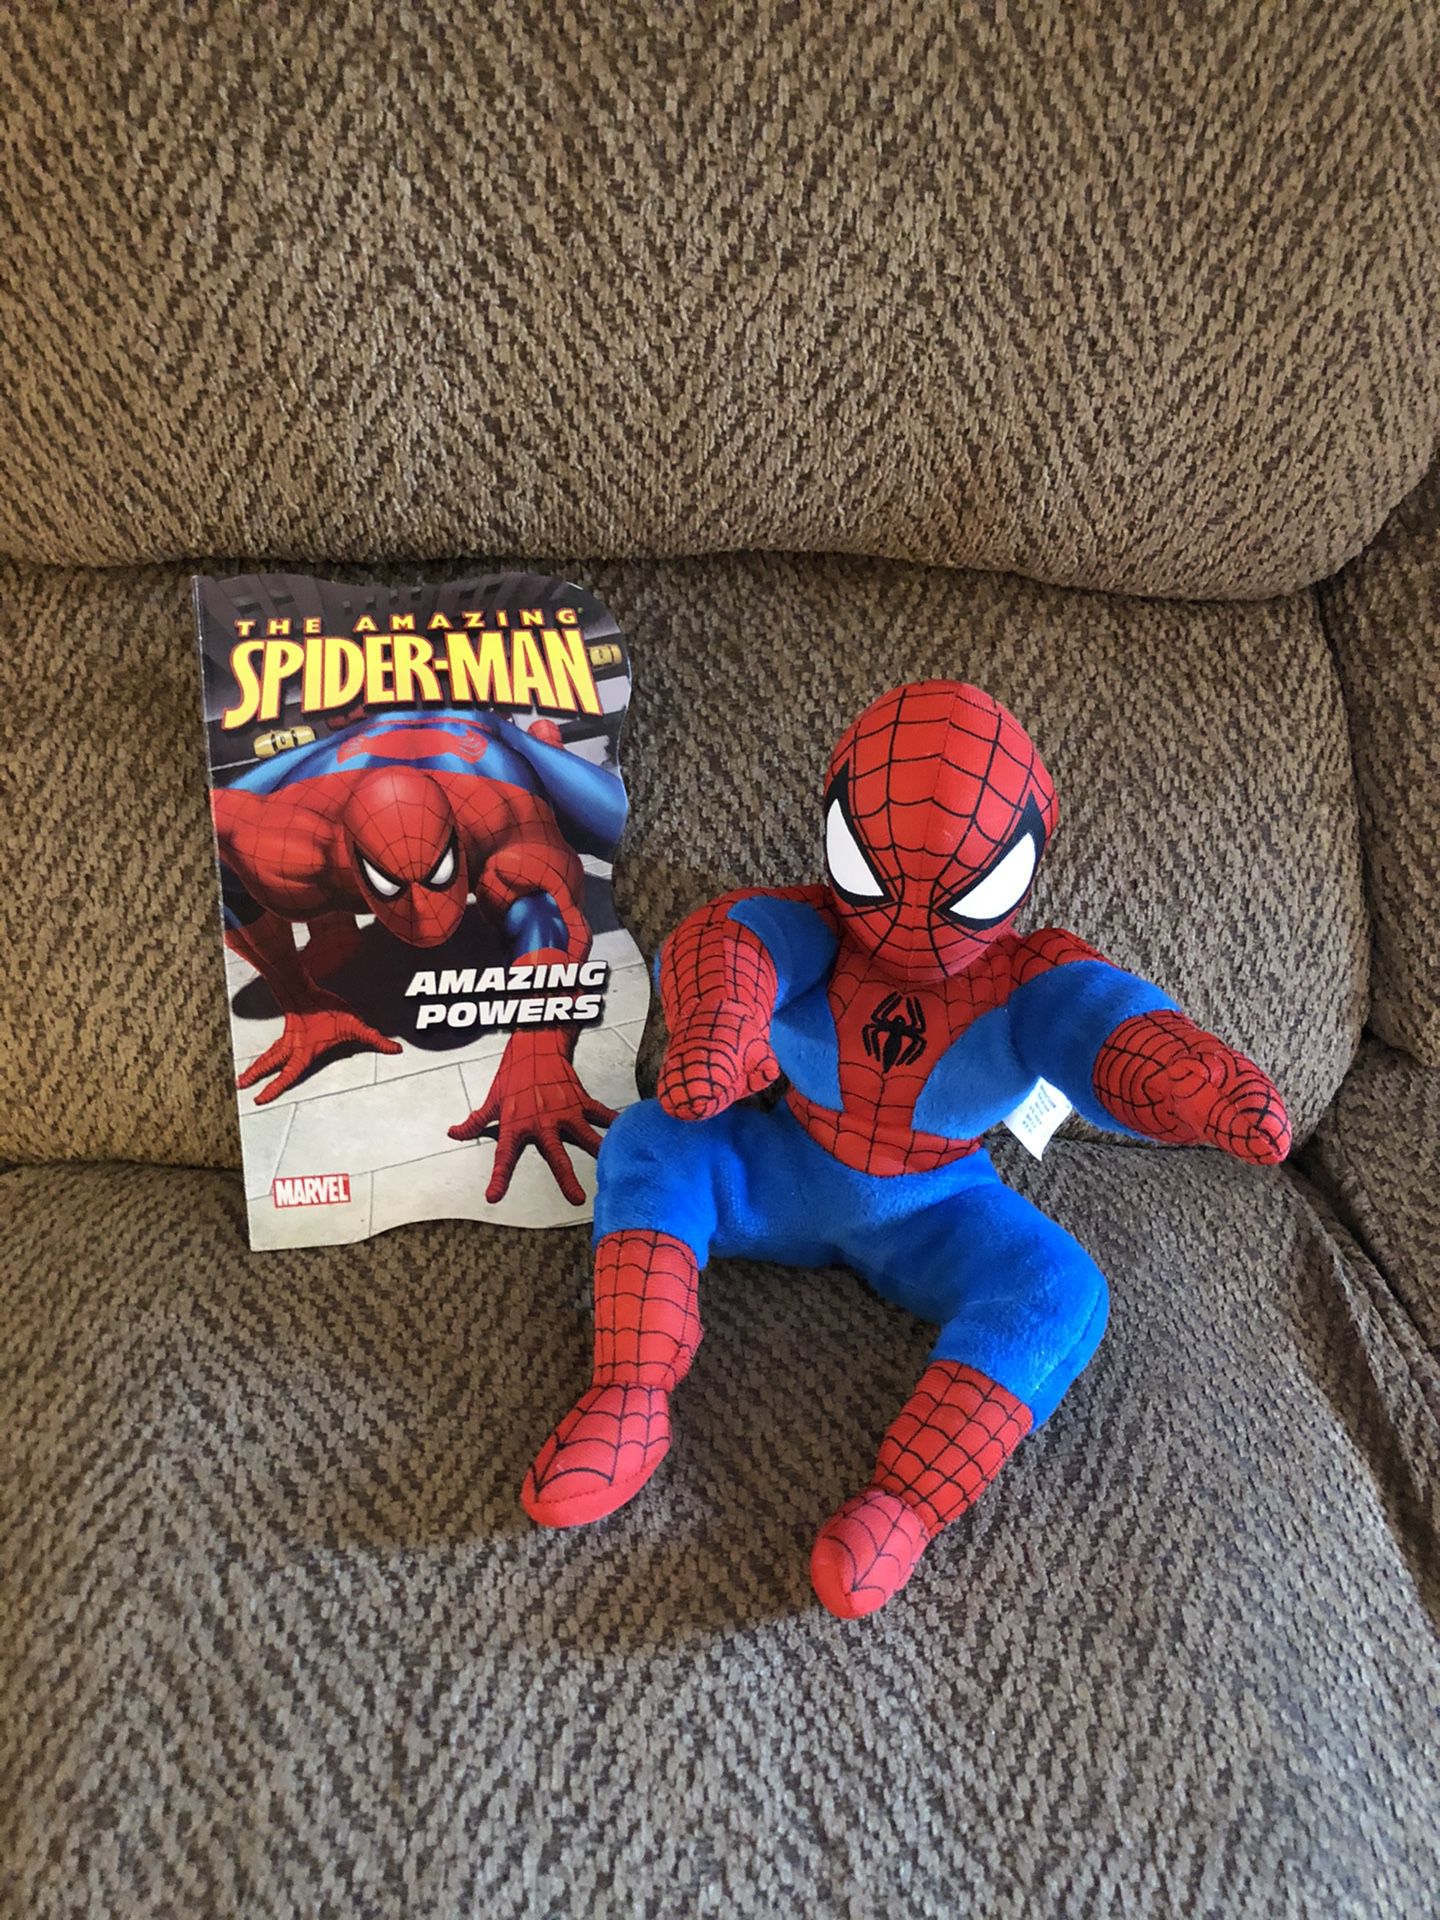 Spiderman plush toy with book